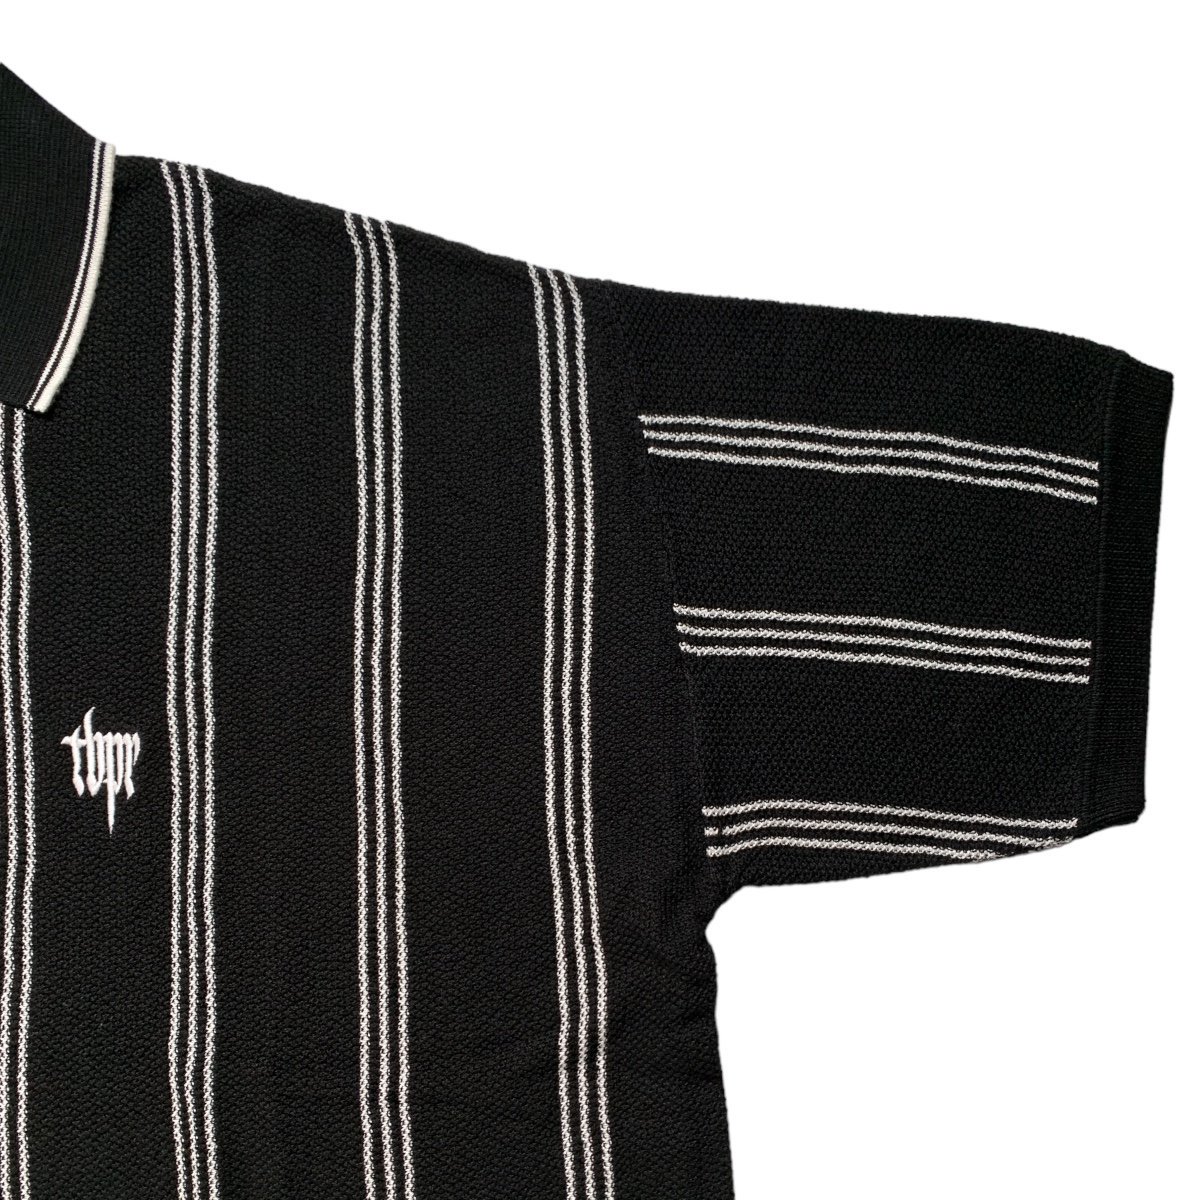 TIGHTBOOTH《タイトブース》TBPR / STRIPE KNIT POLO(SS24-KN03 